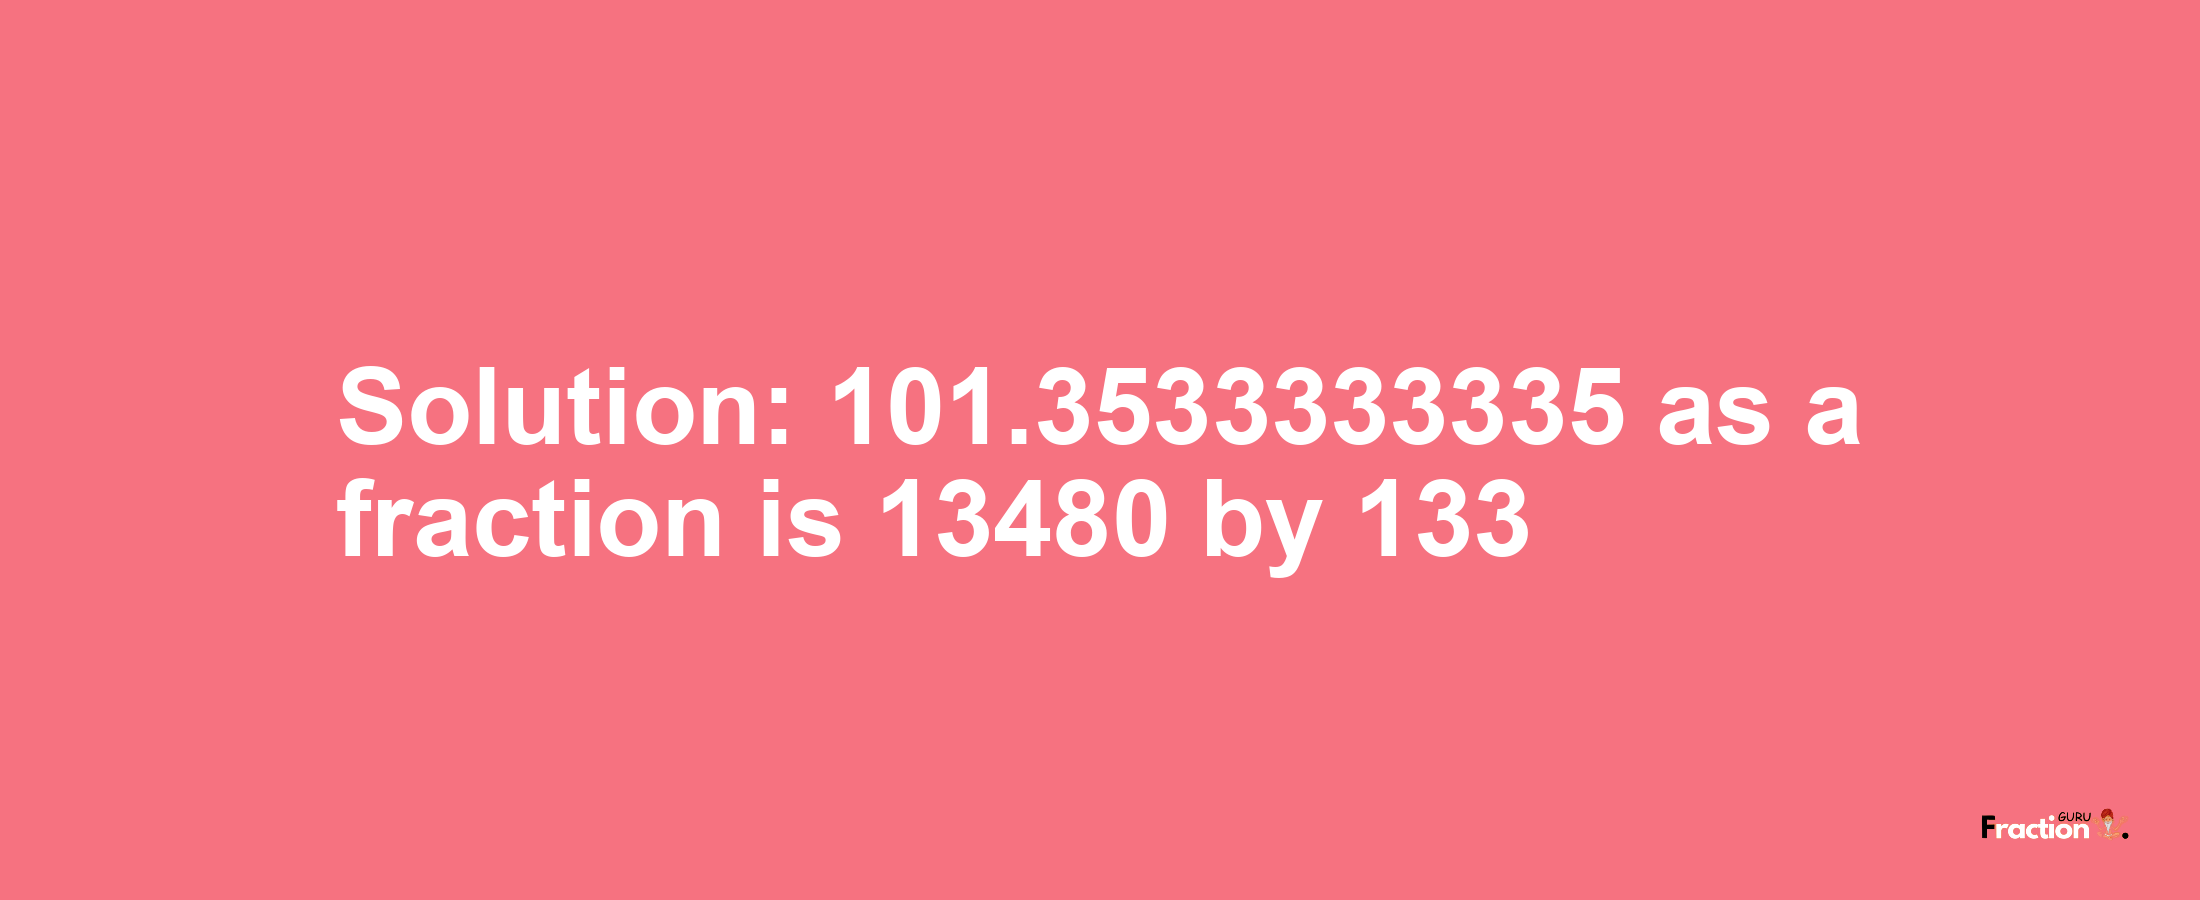 Solution:101.3533333335 as a fraction is 13480/133